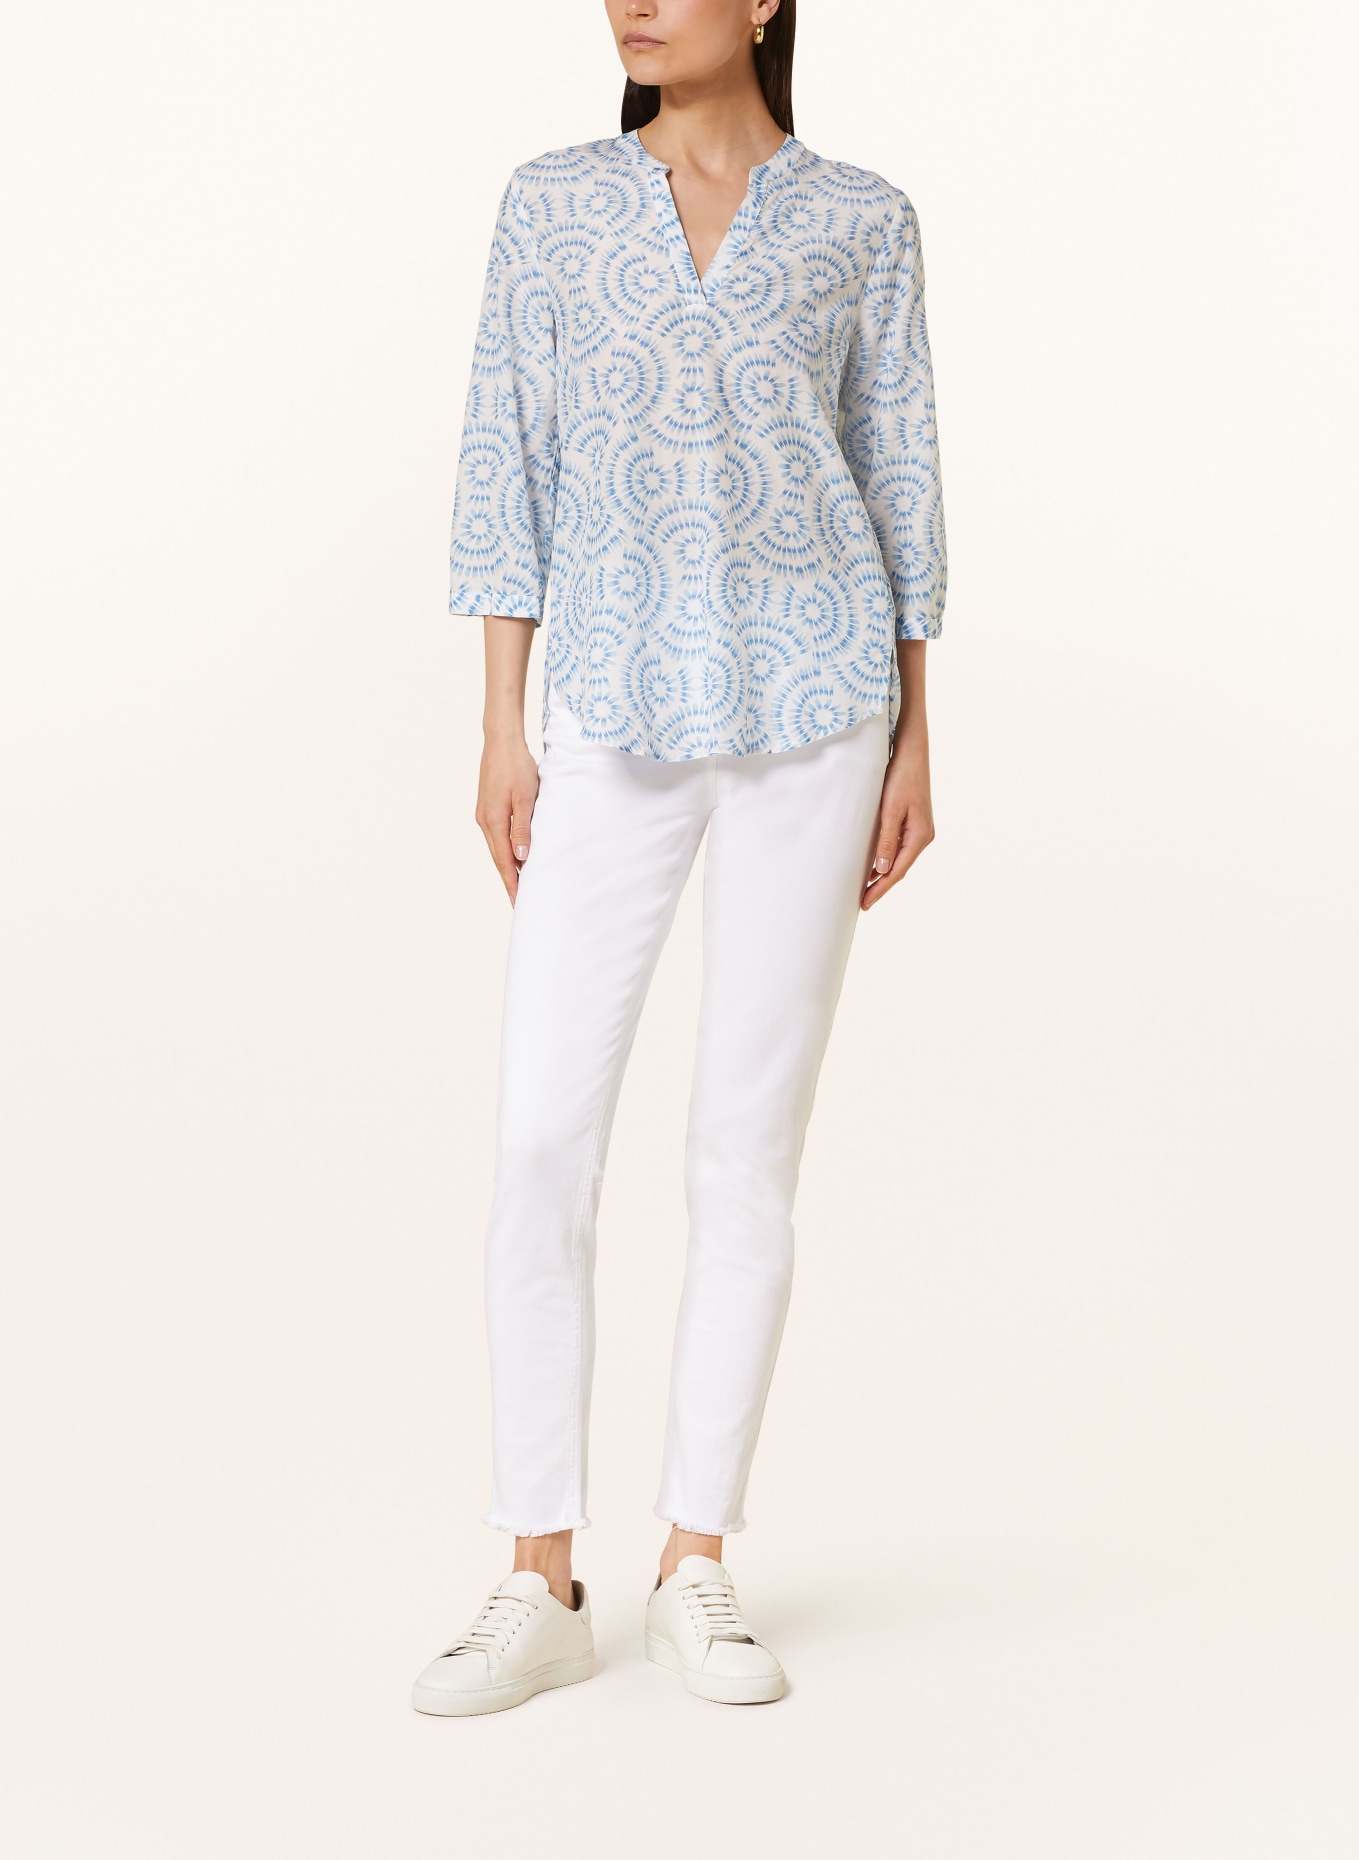 ETERNA Shirt blouse with 3/4 sleeves, Color: LIGHT BLUE/ WHITE (Image 2)